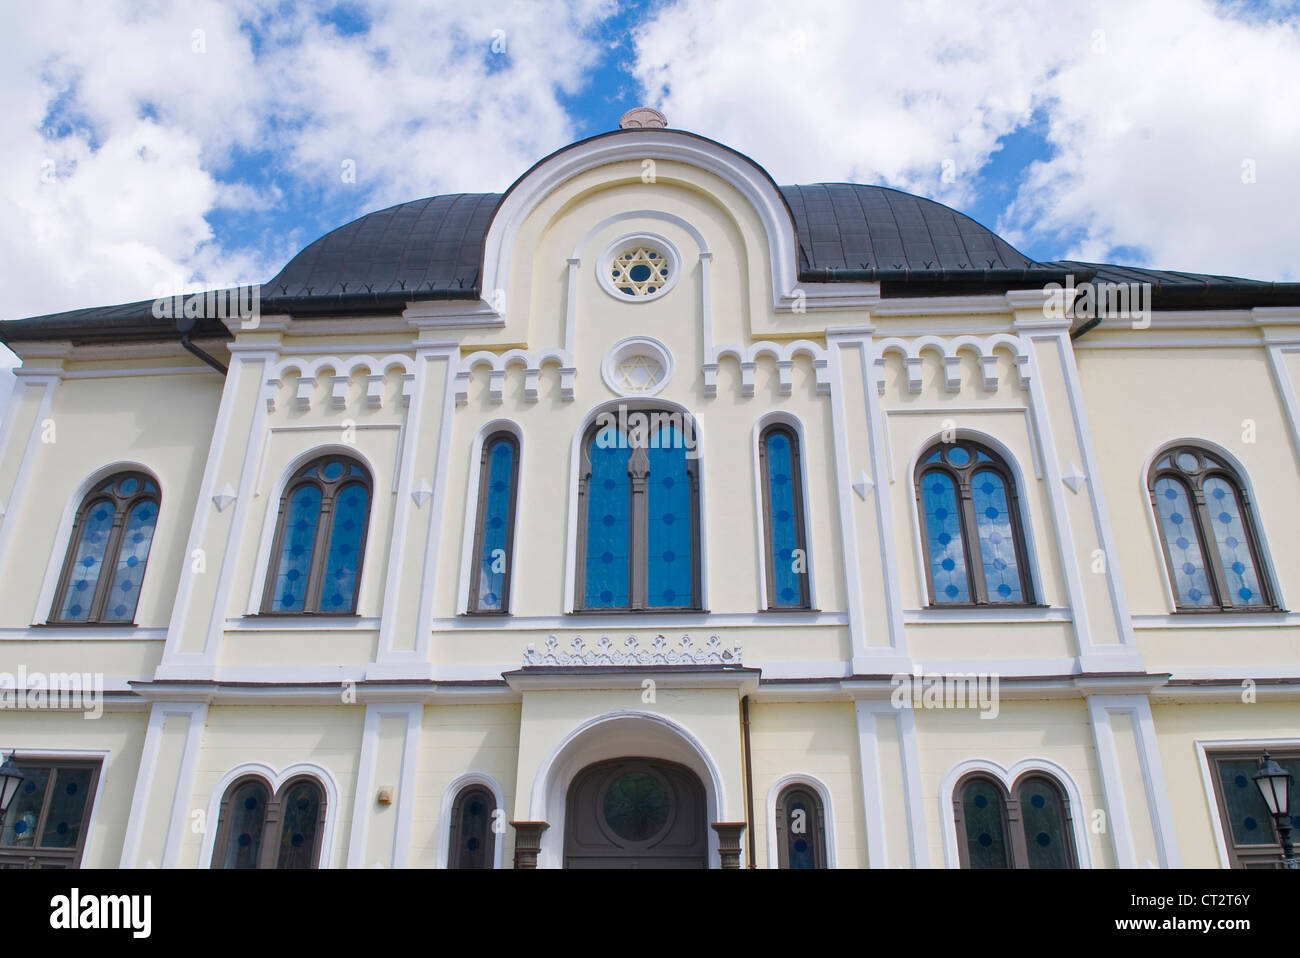 An old synagogue in the town of Tokaj Hungary Stock Photo